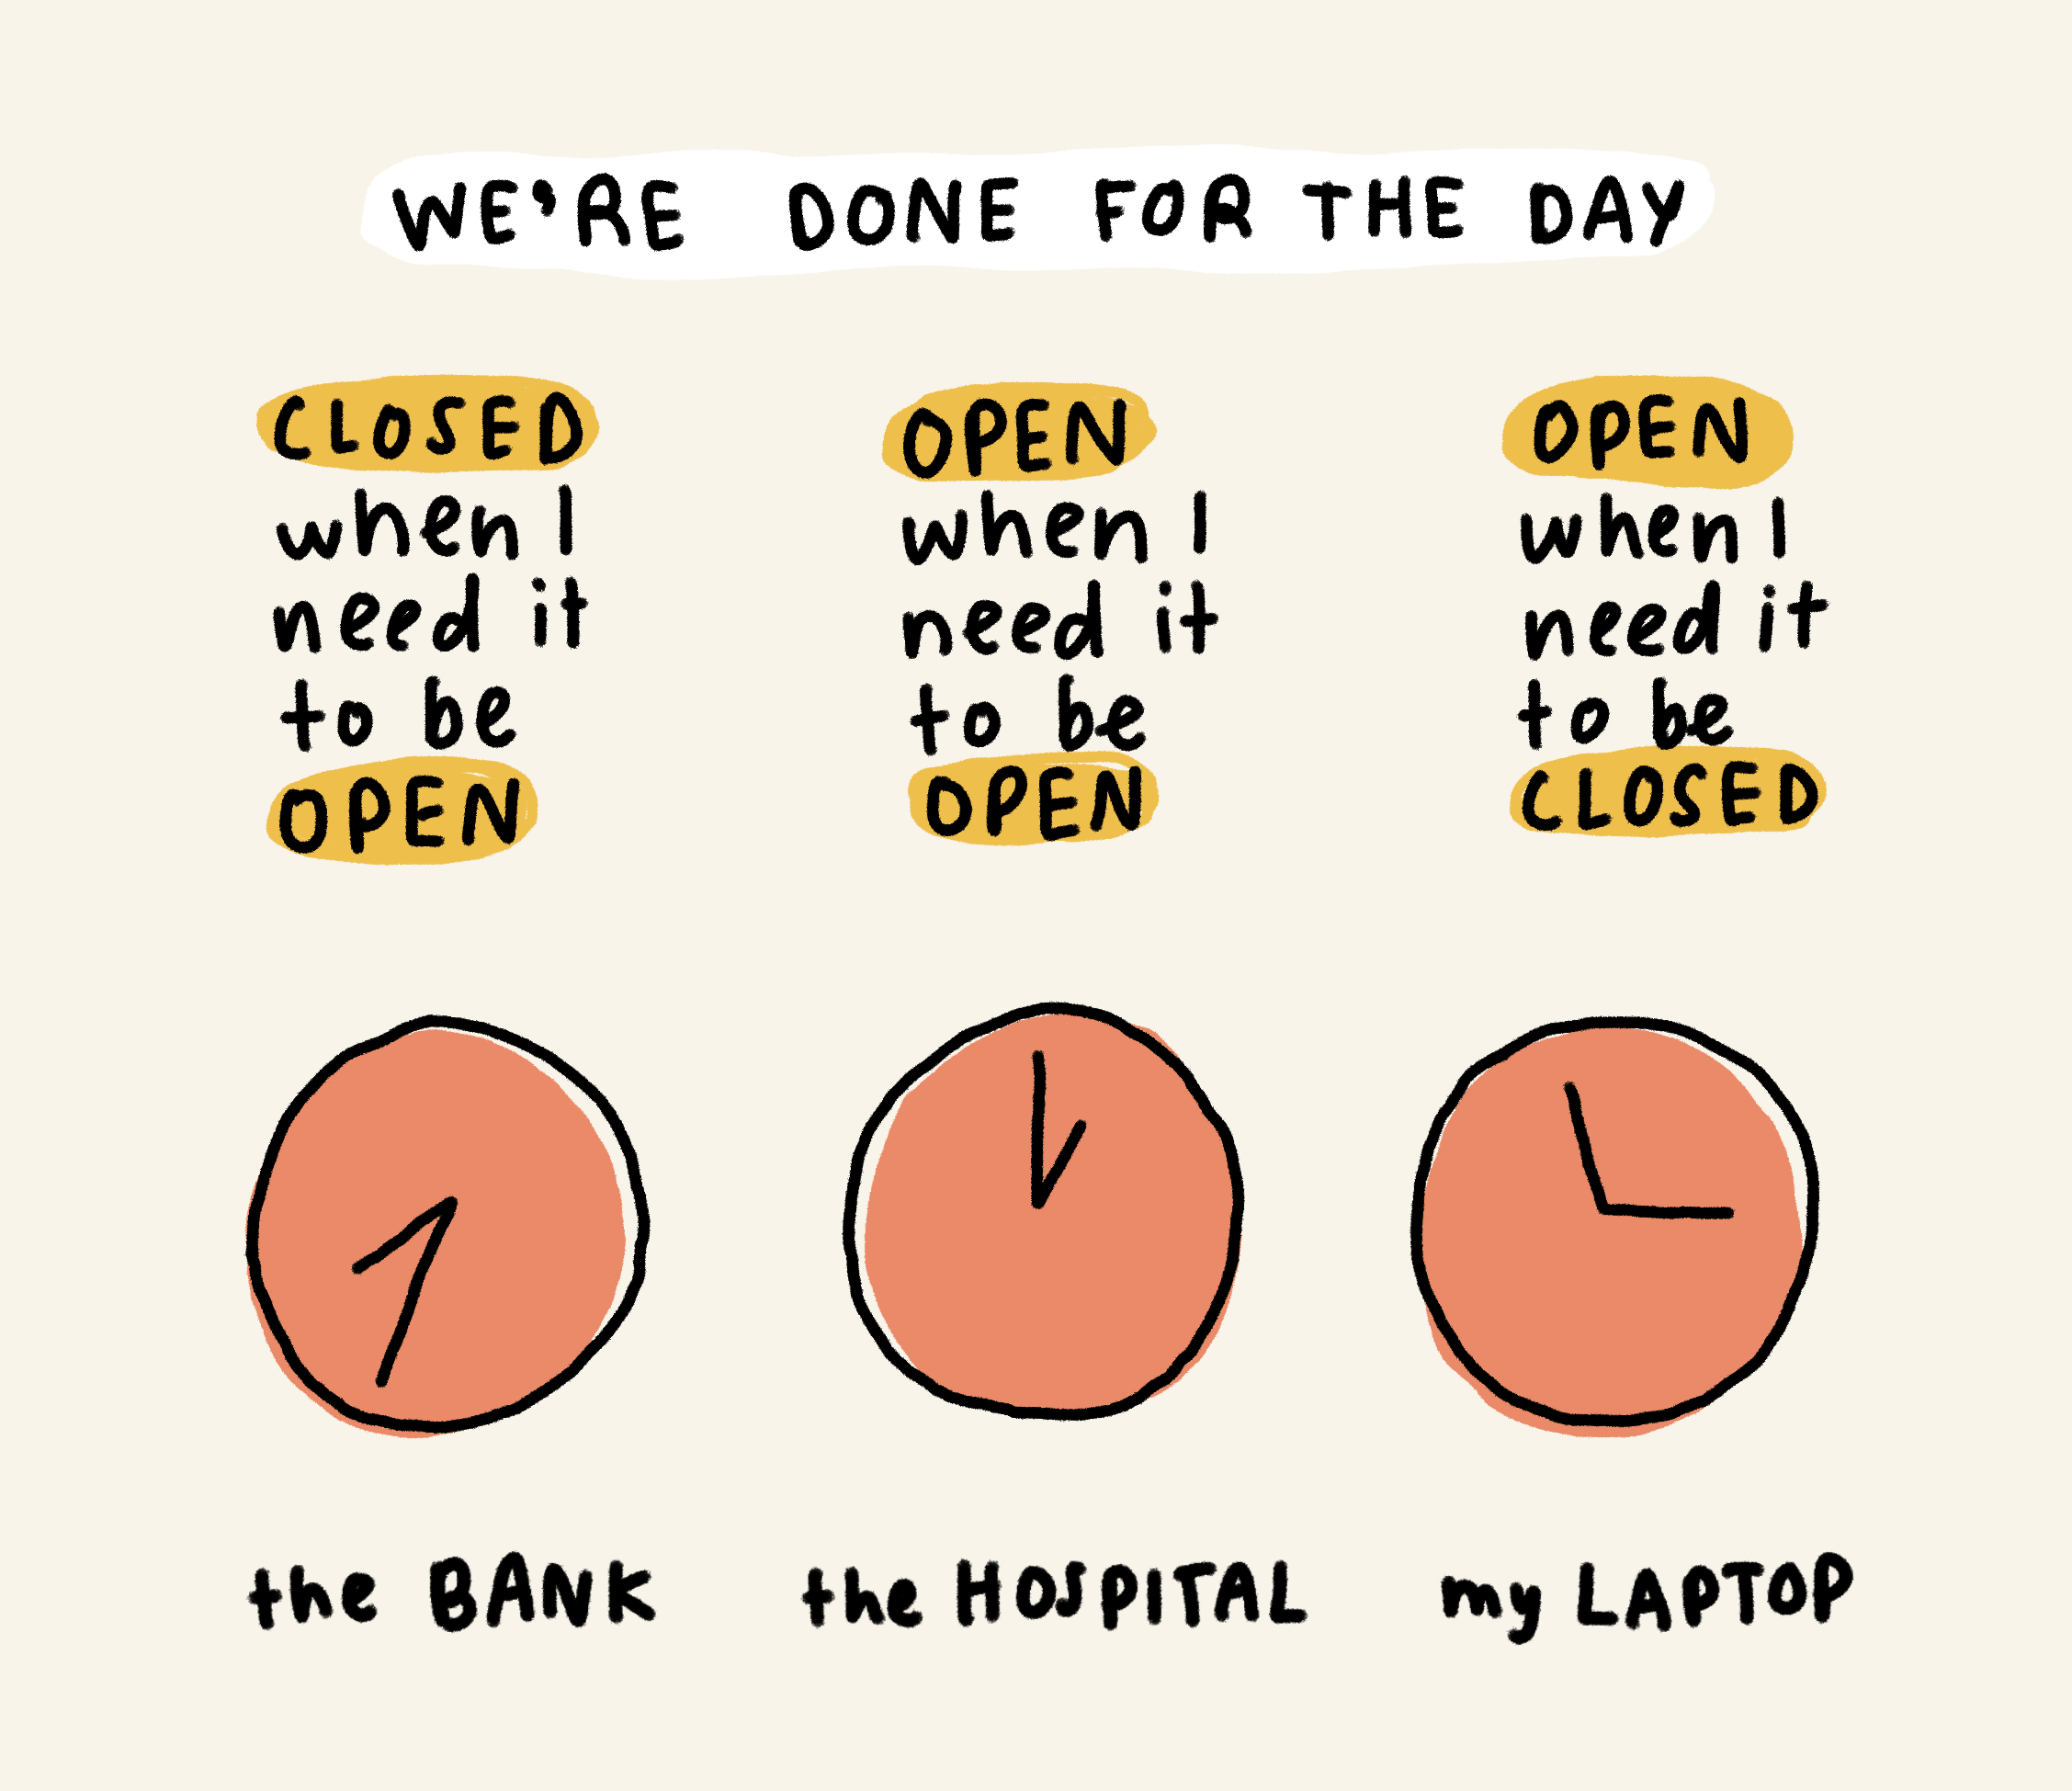 We're done for the day

Closed when I need it to be open [clock set to 7pm]: the bank
Open when I need it to be open [clock set to 1am]: the hospital
Open when I need it to be closed [clock hands positioned like open computer]: my laptop